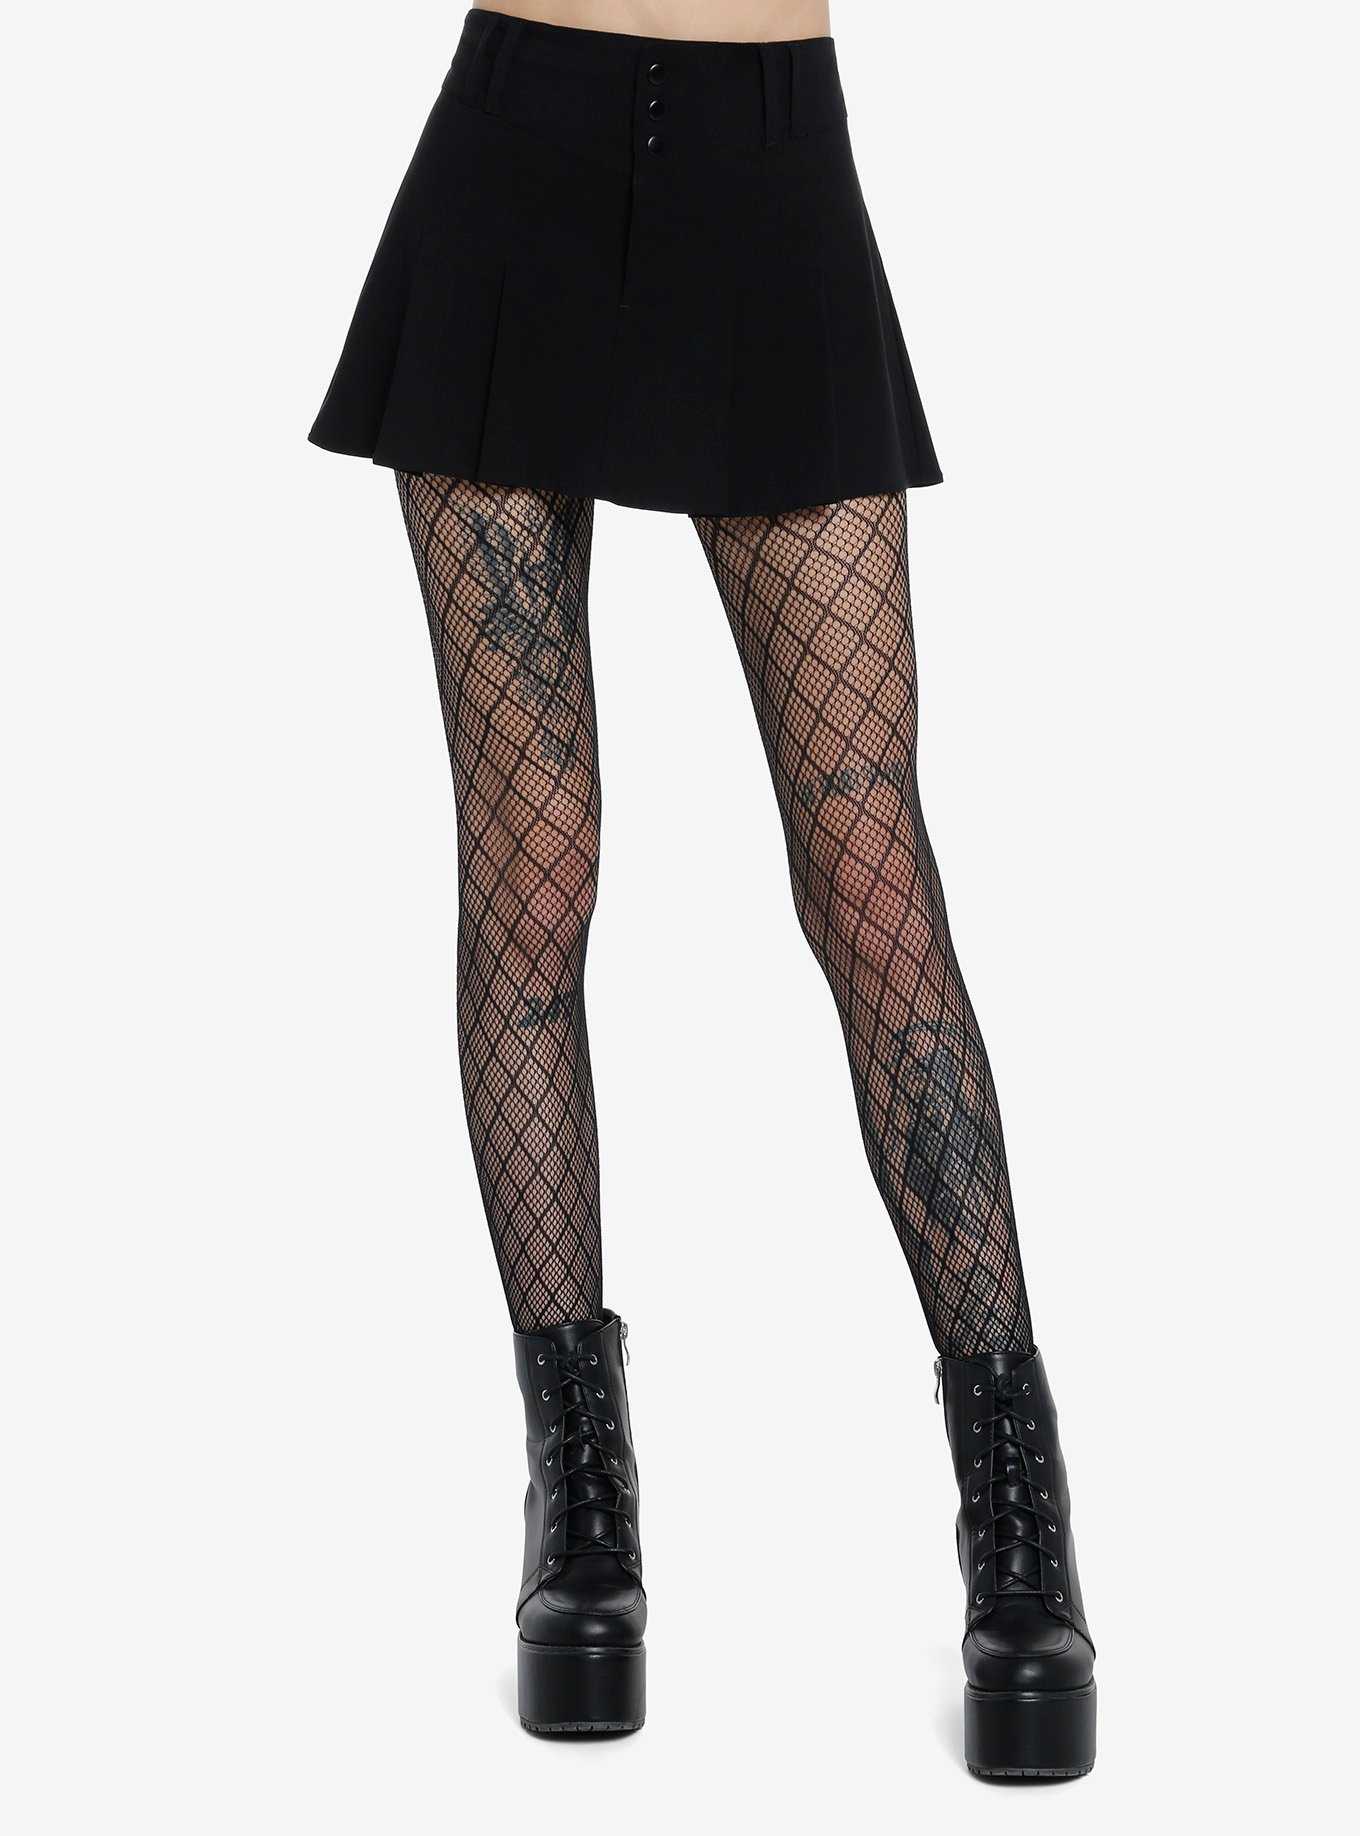 Country Kids Girls Black & Gold Star Tights